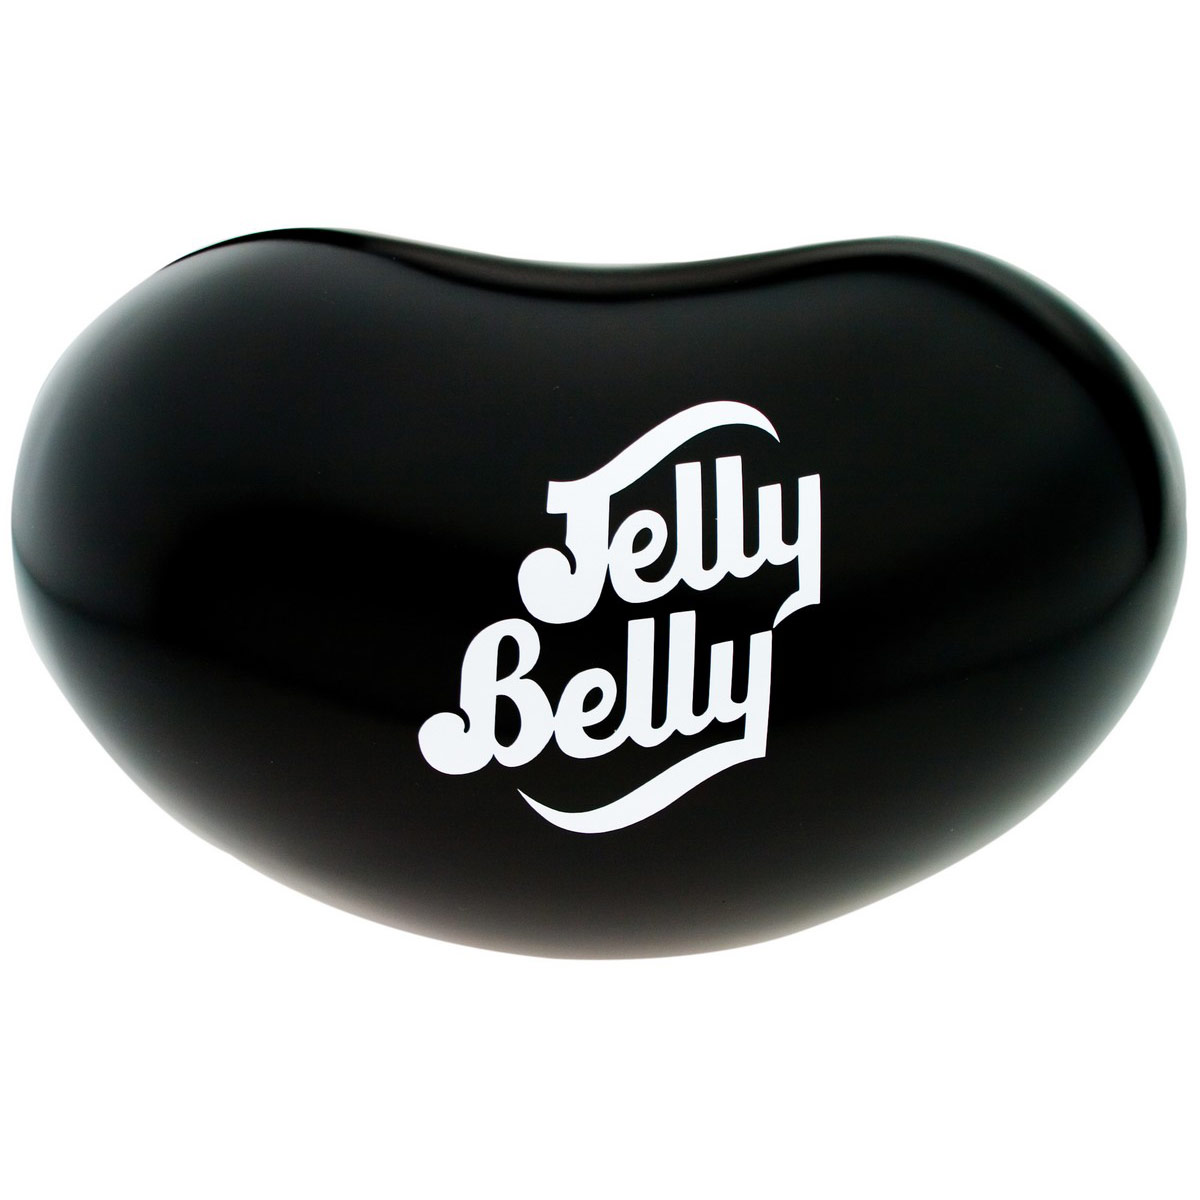 Jelly Belly Coupons Promo Codes And Free Shipping May 2017